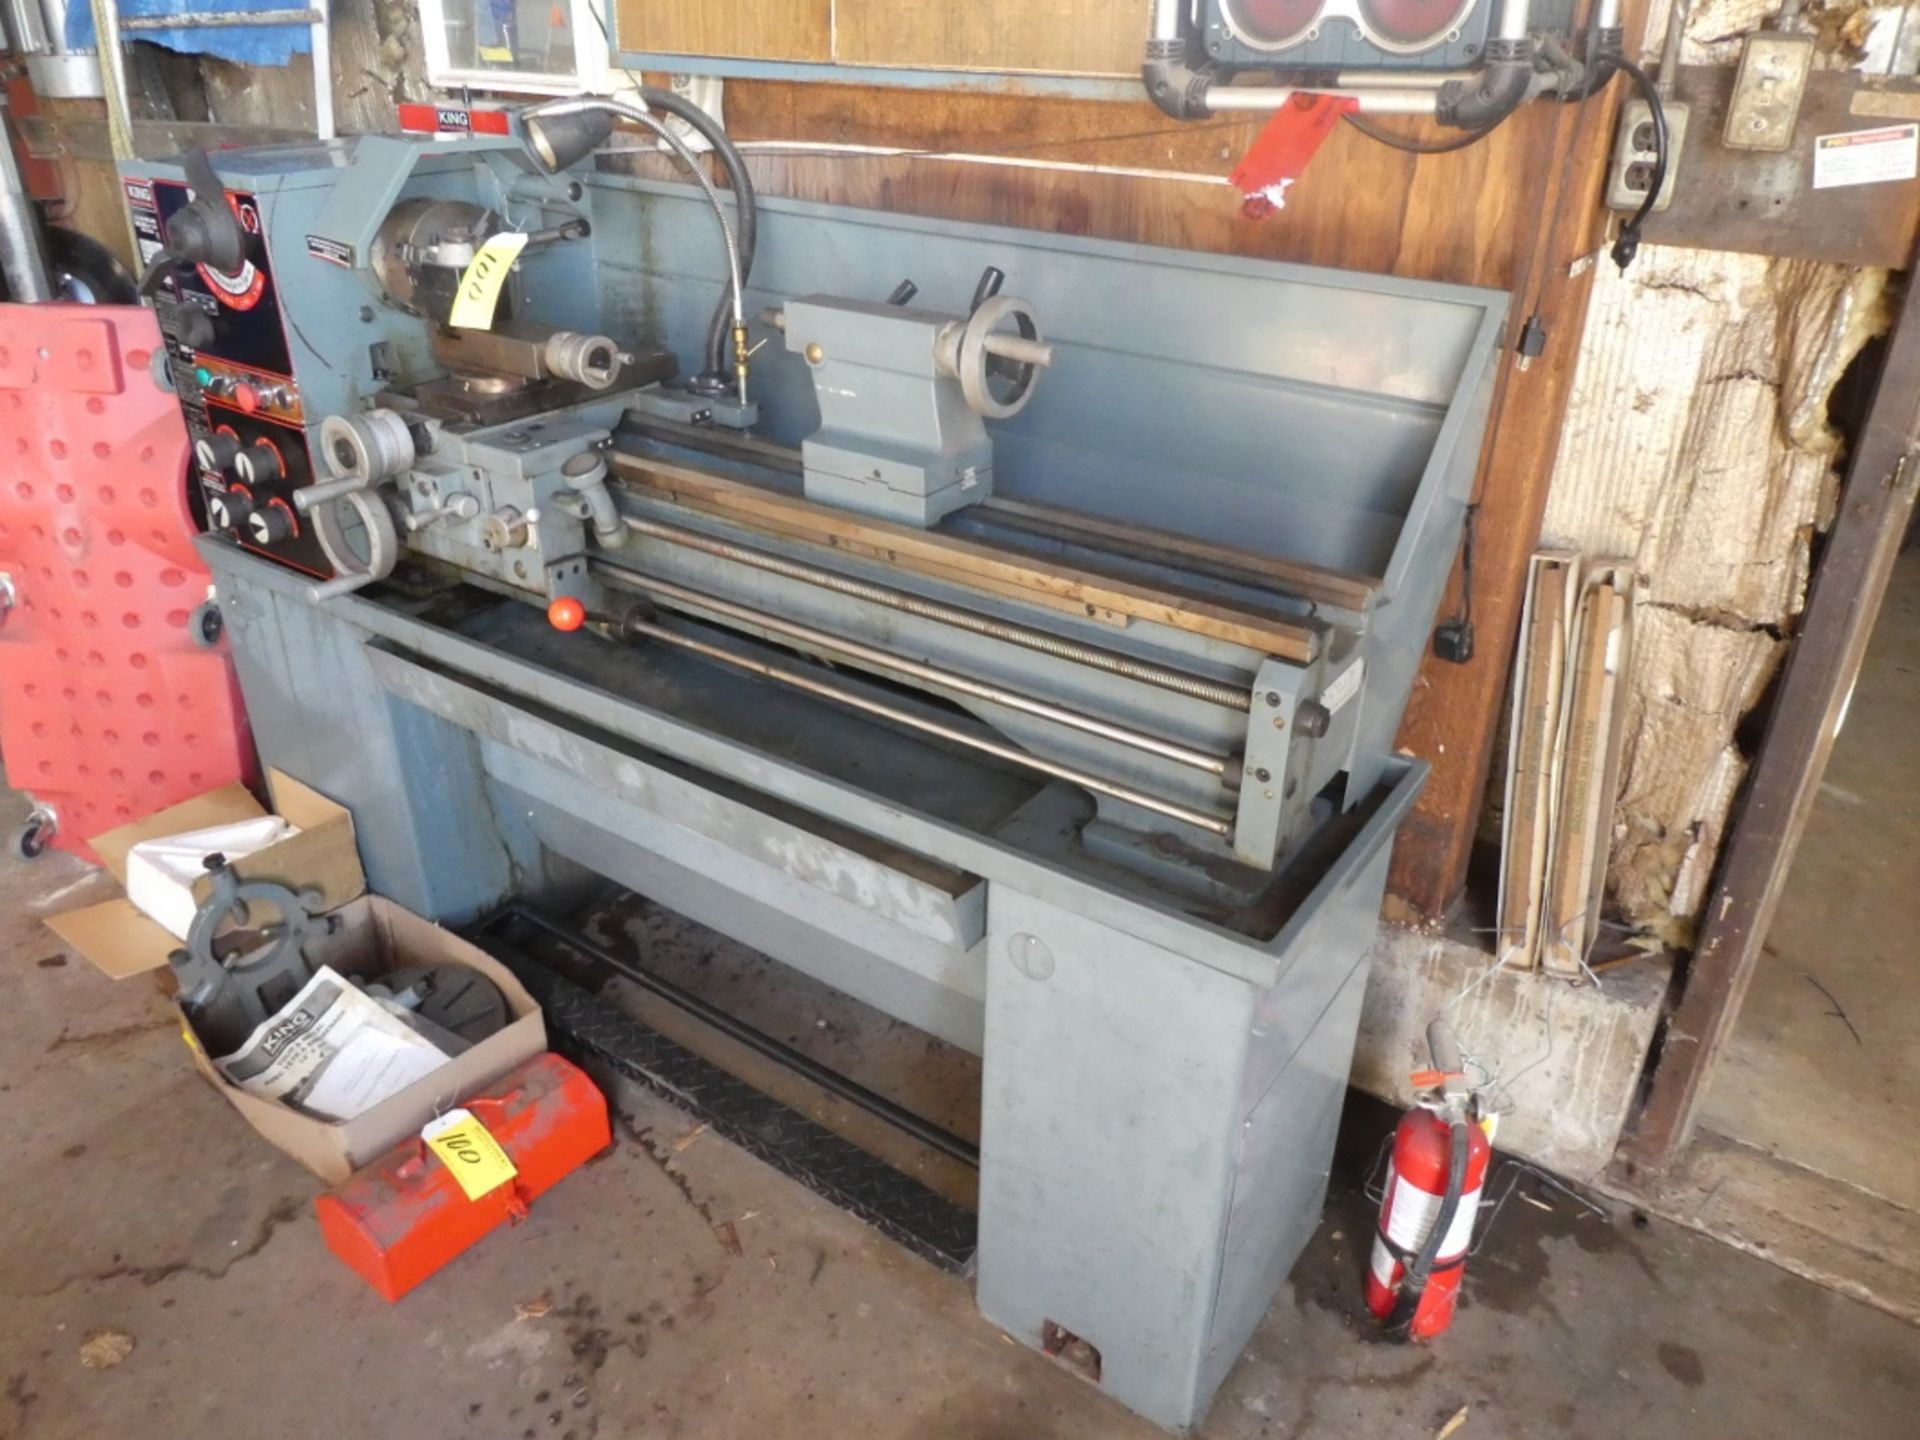 2005 KING INDUSTRIAL 14IN X 40IN METALWORKING ENGINE LATHE W/ 1IN BORE, HP/CV 2, SINGLE PHASE, 240V, - Image 2 of 6